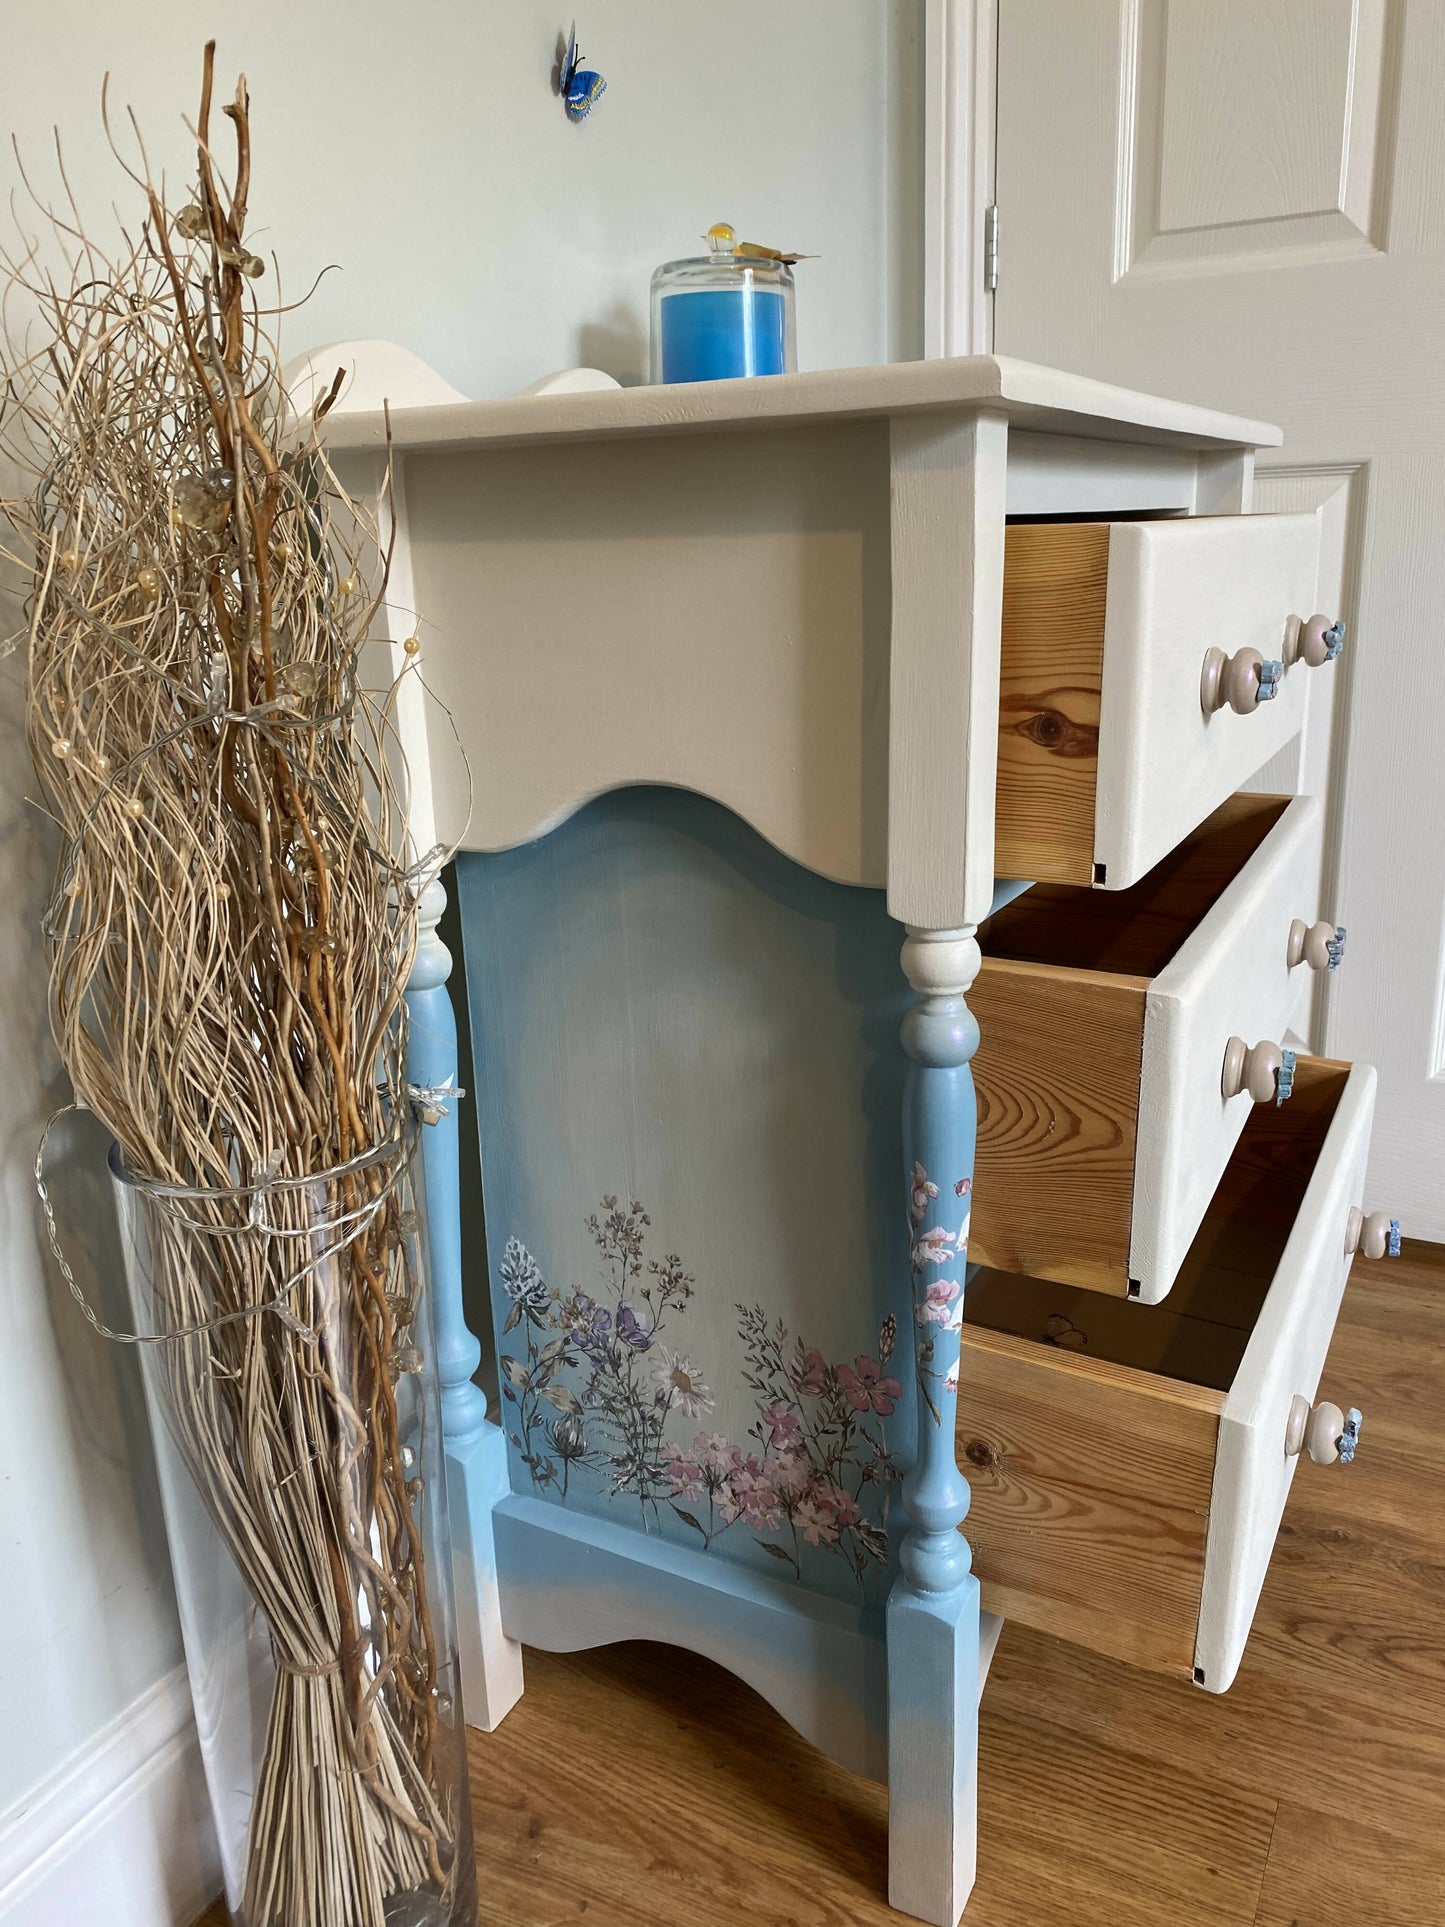 Painted solid pine cream and blue chest of drawers with 3 drawers under /children’s bedroom furniture